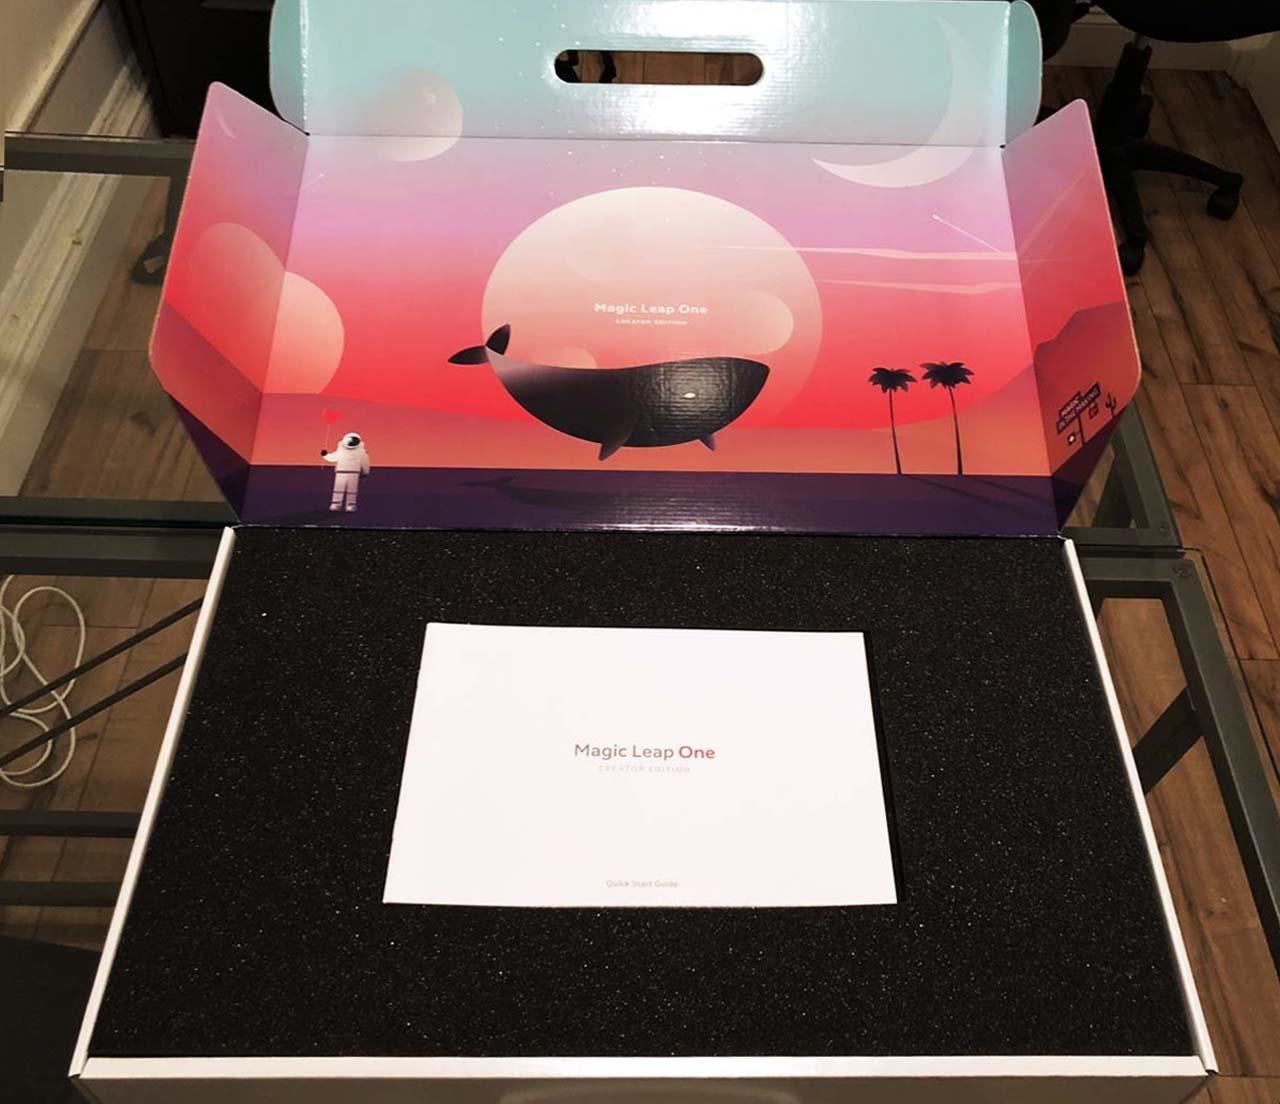 The Ultimate Magic Leap One Unboxing, Every Part, Every Logo, & One Very Special Surprise Treat